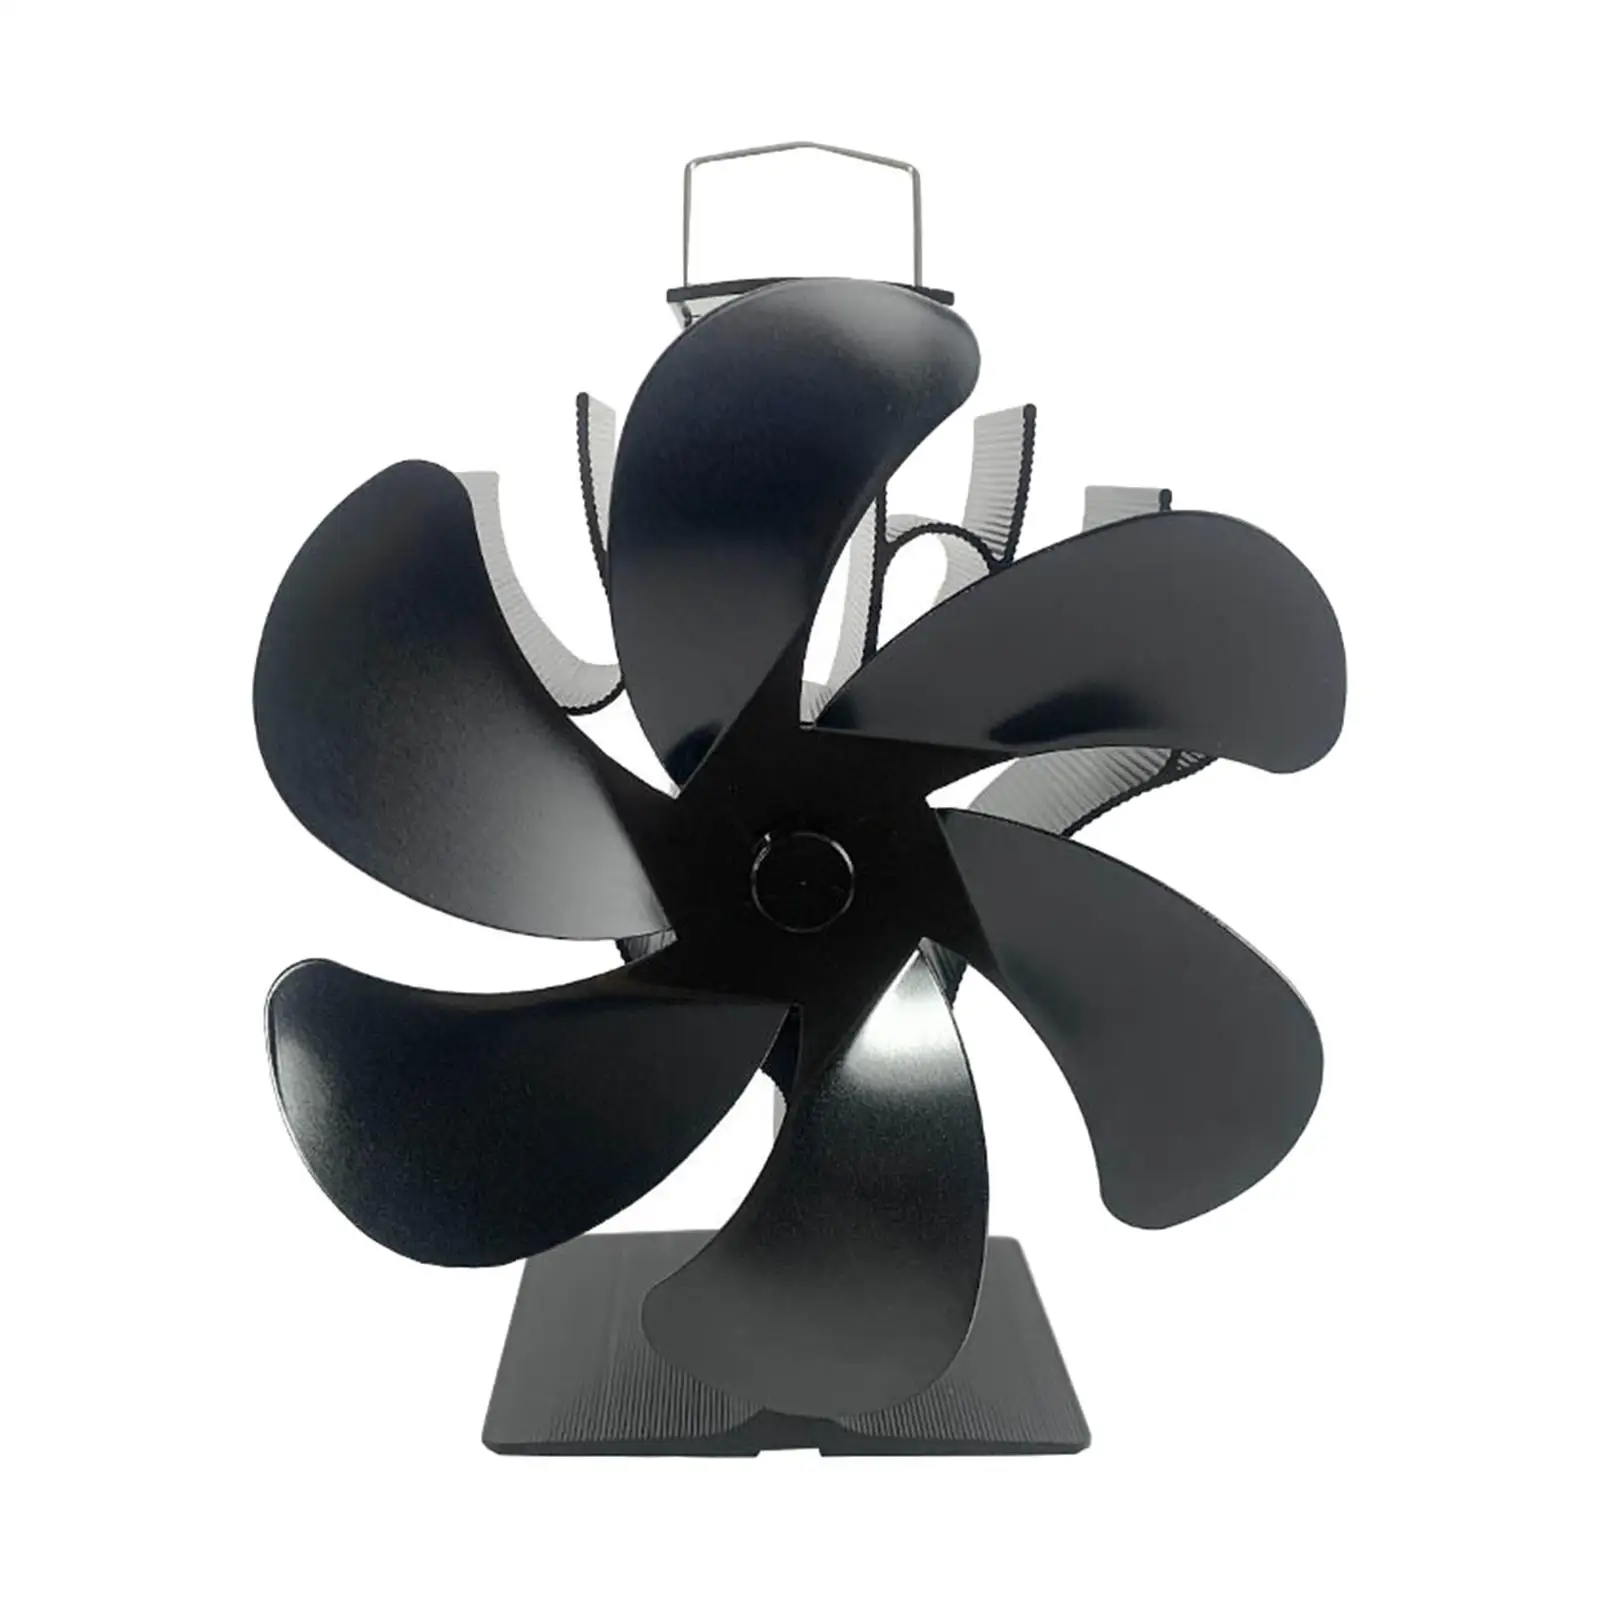 6 Blades Heat Powered Fireplace Fan Circulating Warm Wood Stove Fan for Burner Heaters Fireplace Wood Stove Accessories